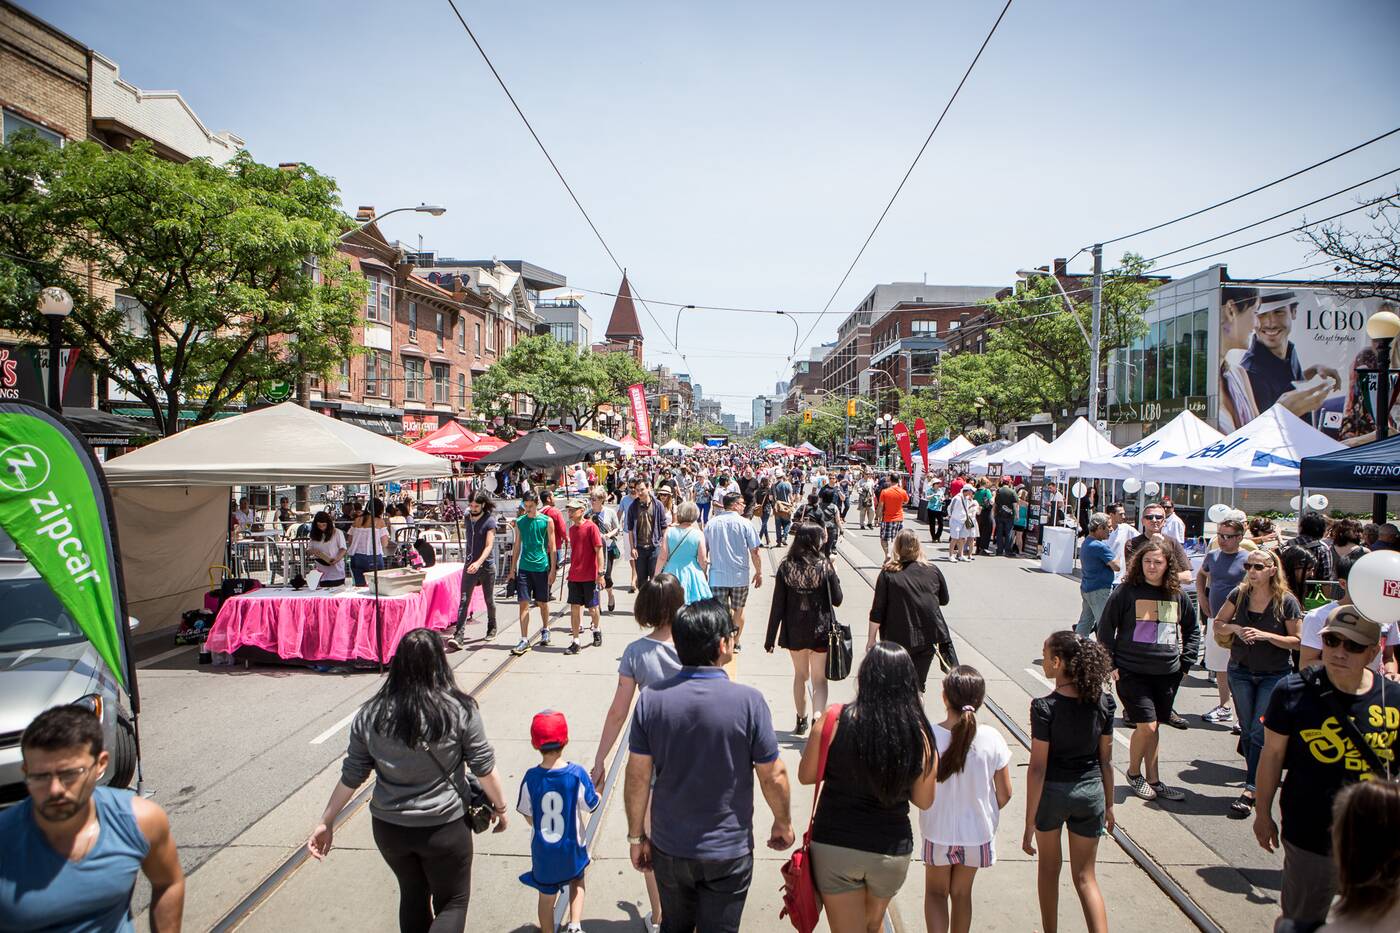 The history of the Little Italy neighbourhood in Toronto